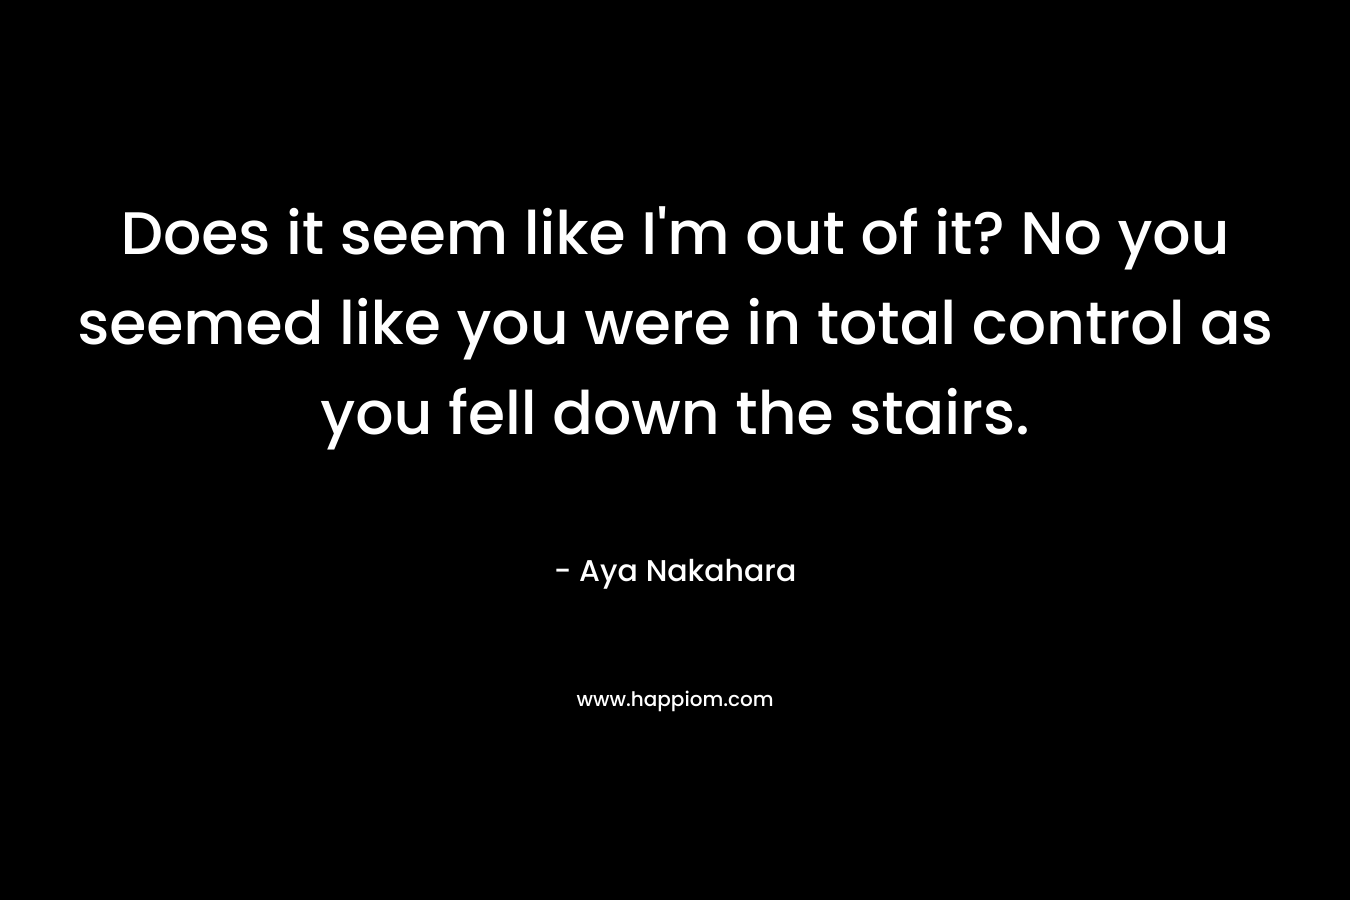 Does it seem like I’m out of it? No you seemed like you were in total control as you fell down the stairs. – Aya Nakahara